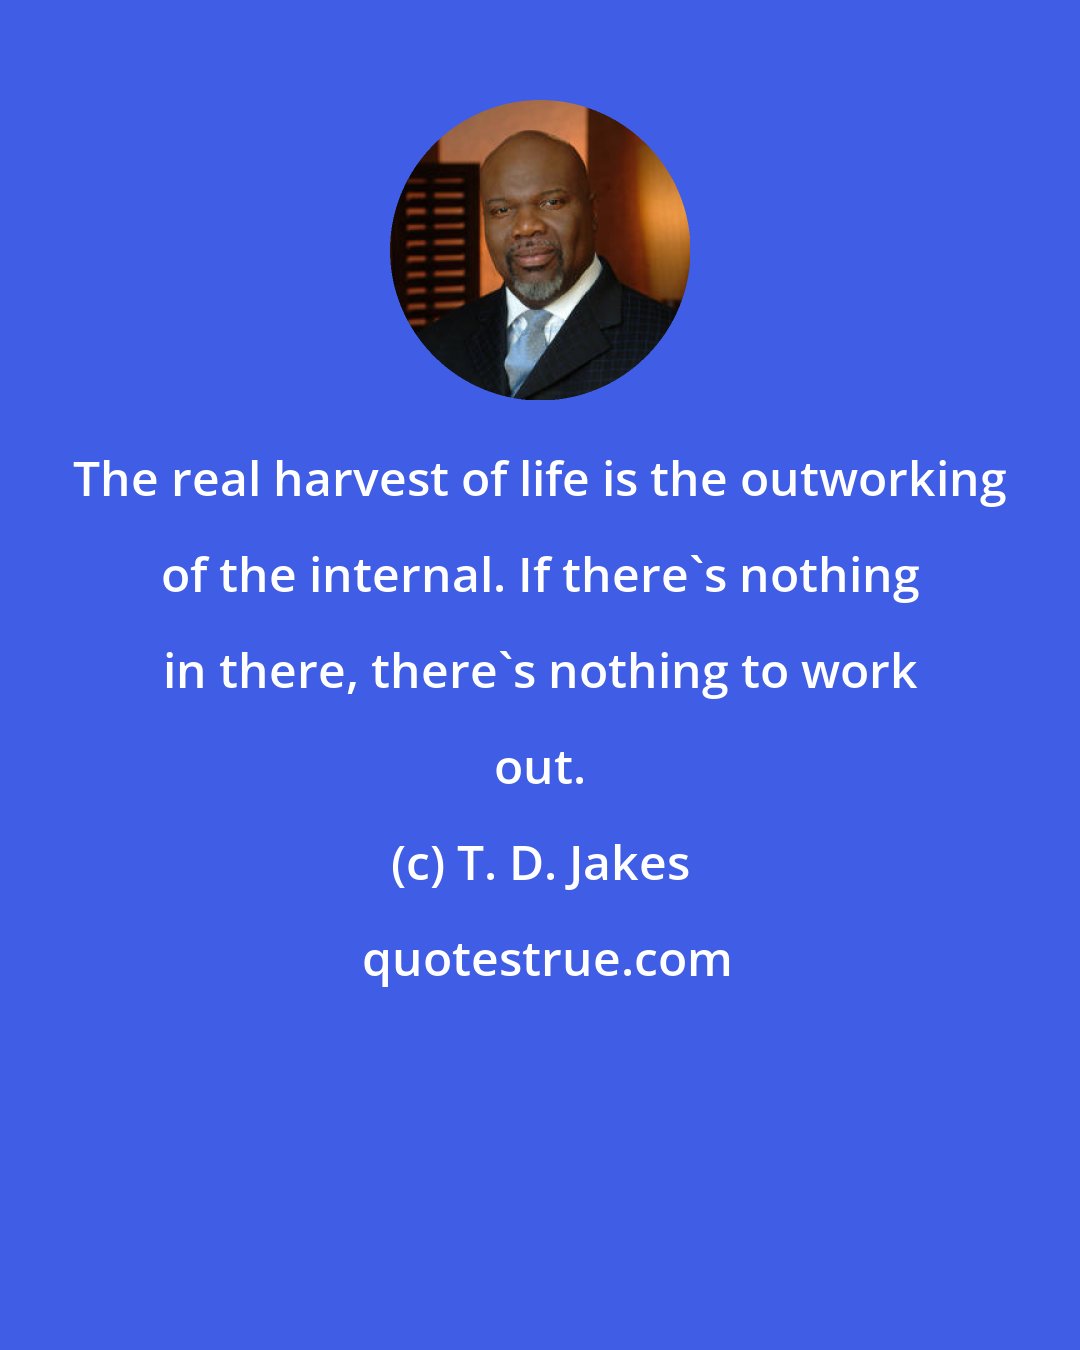 T. D. Jakes: The real harvest of life is the outworking of the internal. If there's nothing in there, there's nothing to work out.